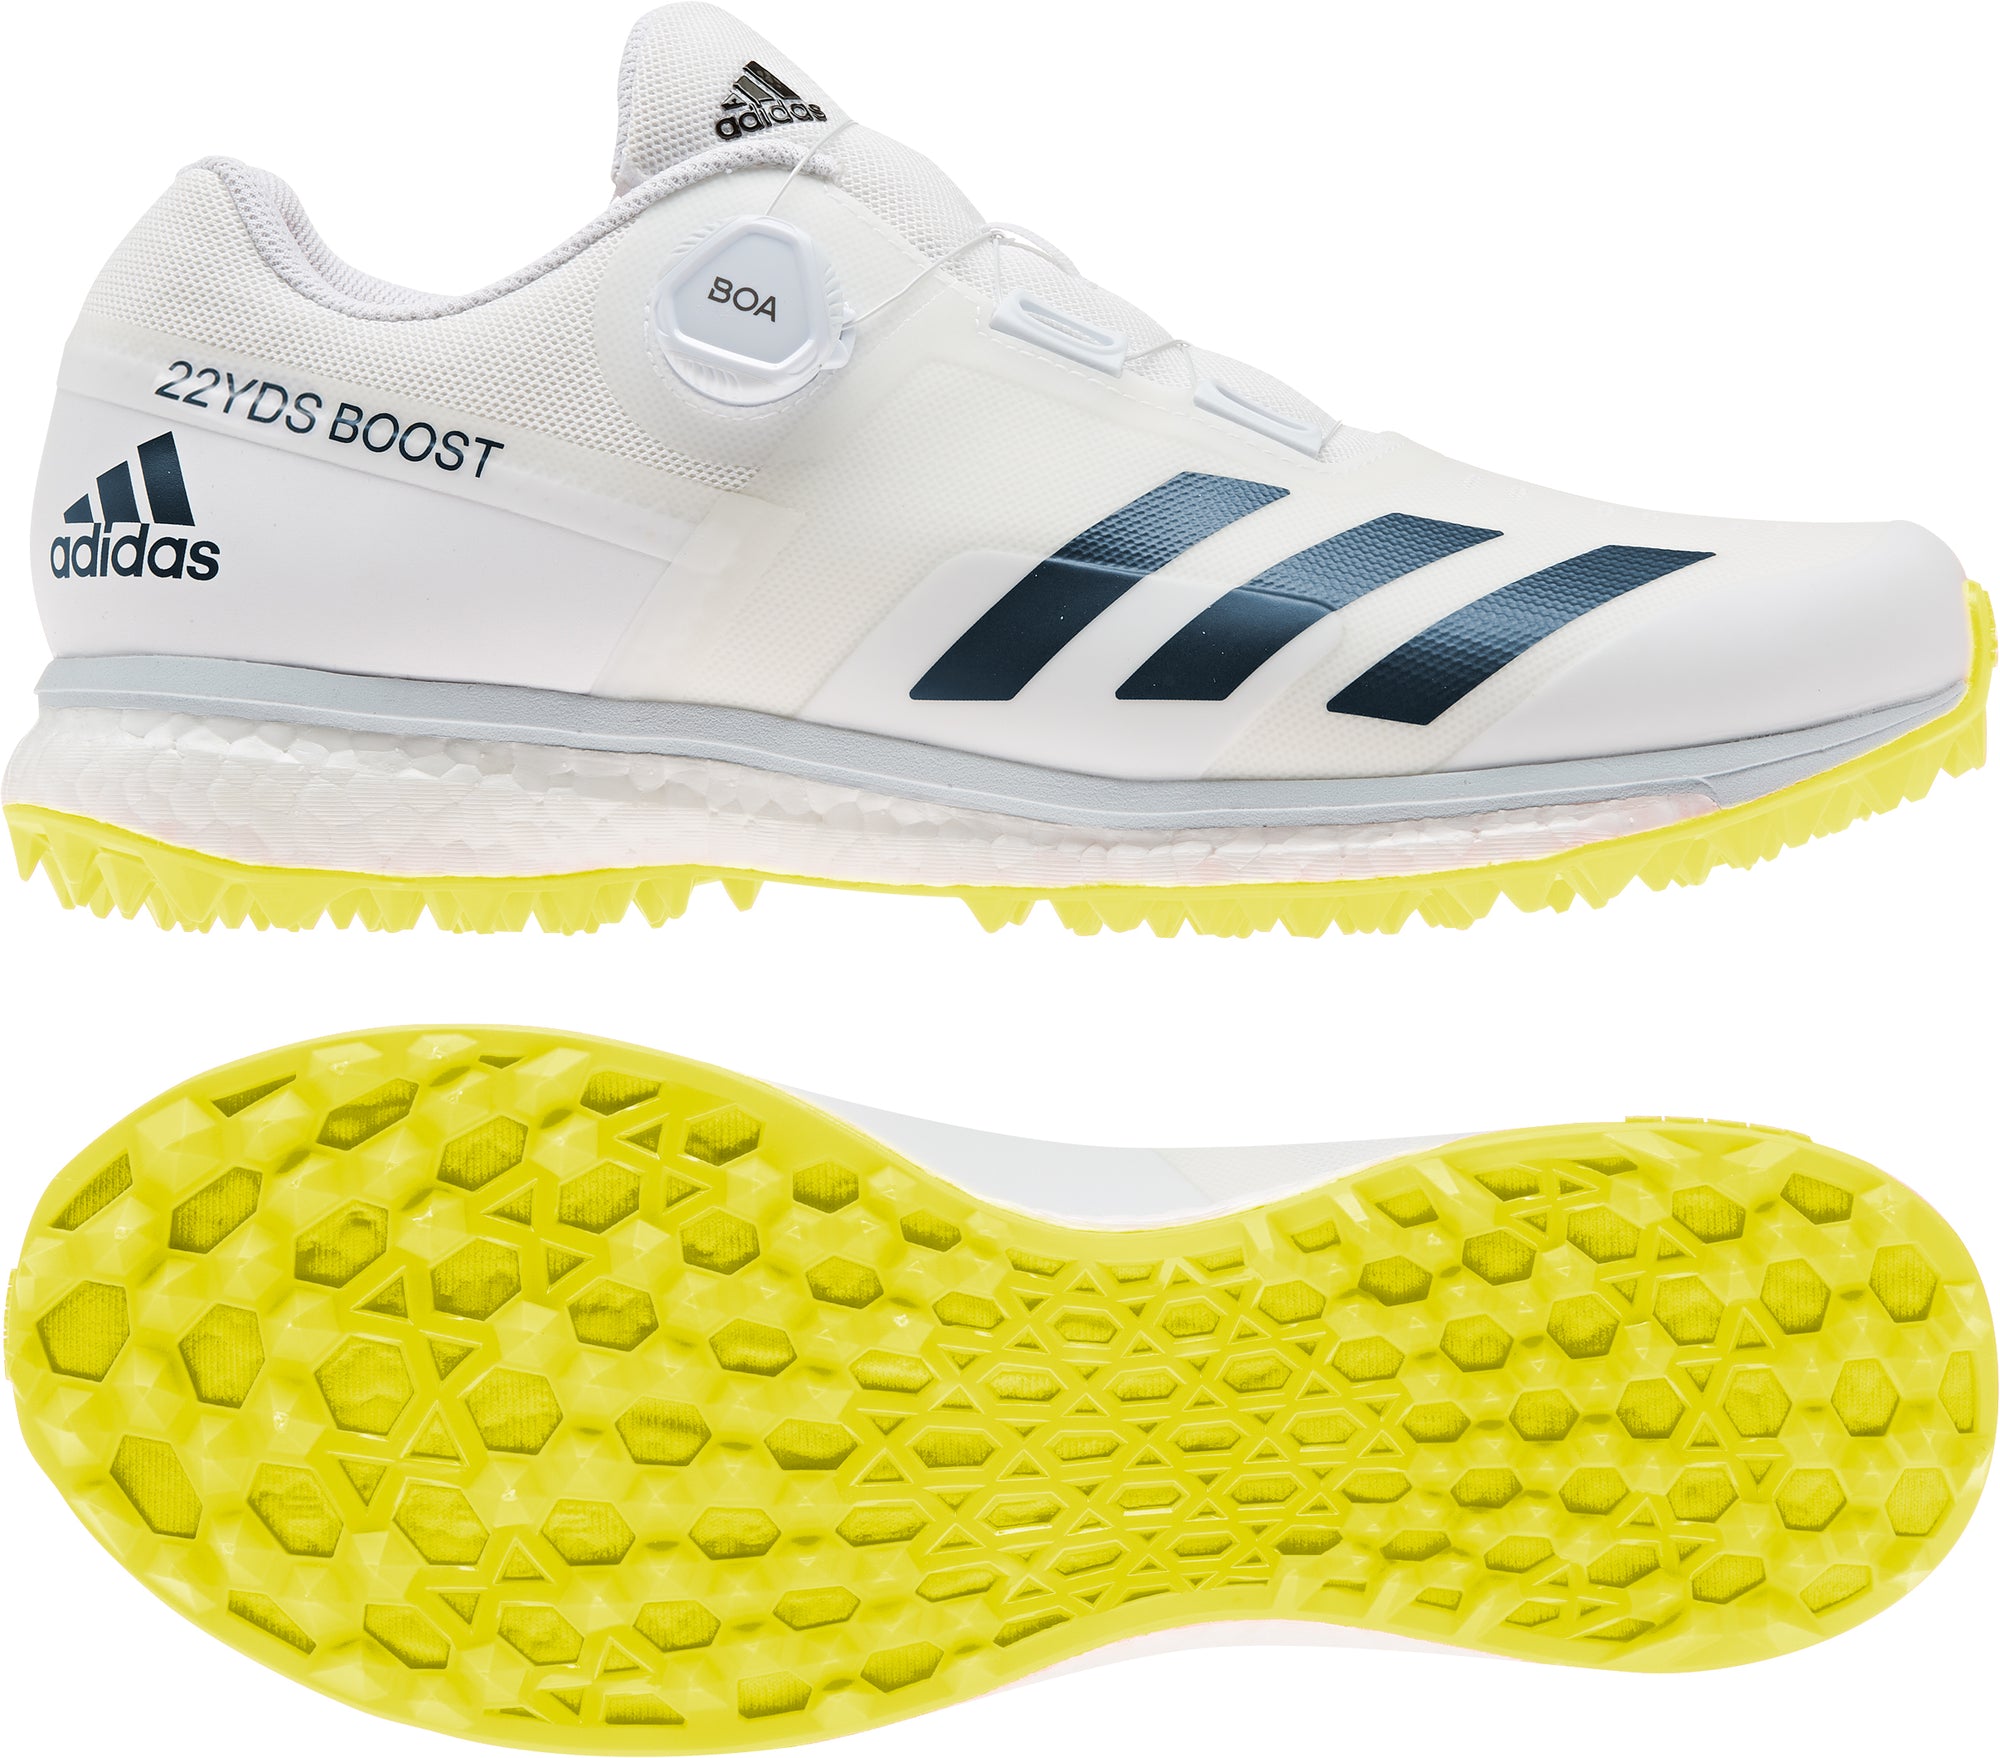 Adidas 22yds Boost Cricket Shoes 2023